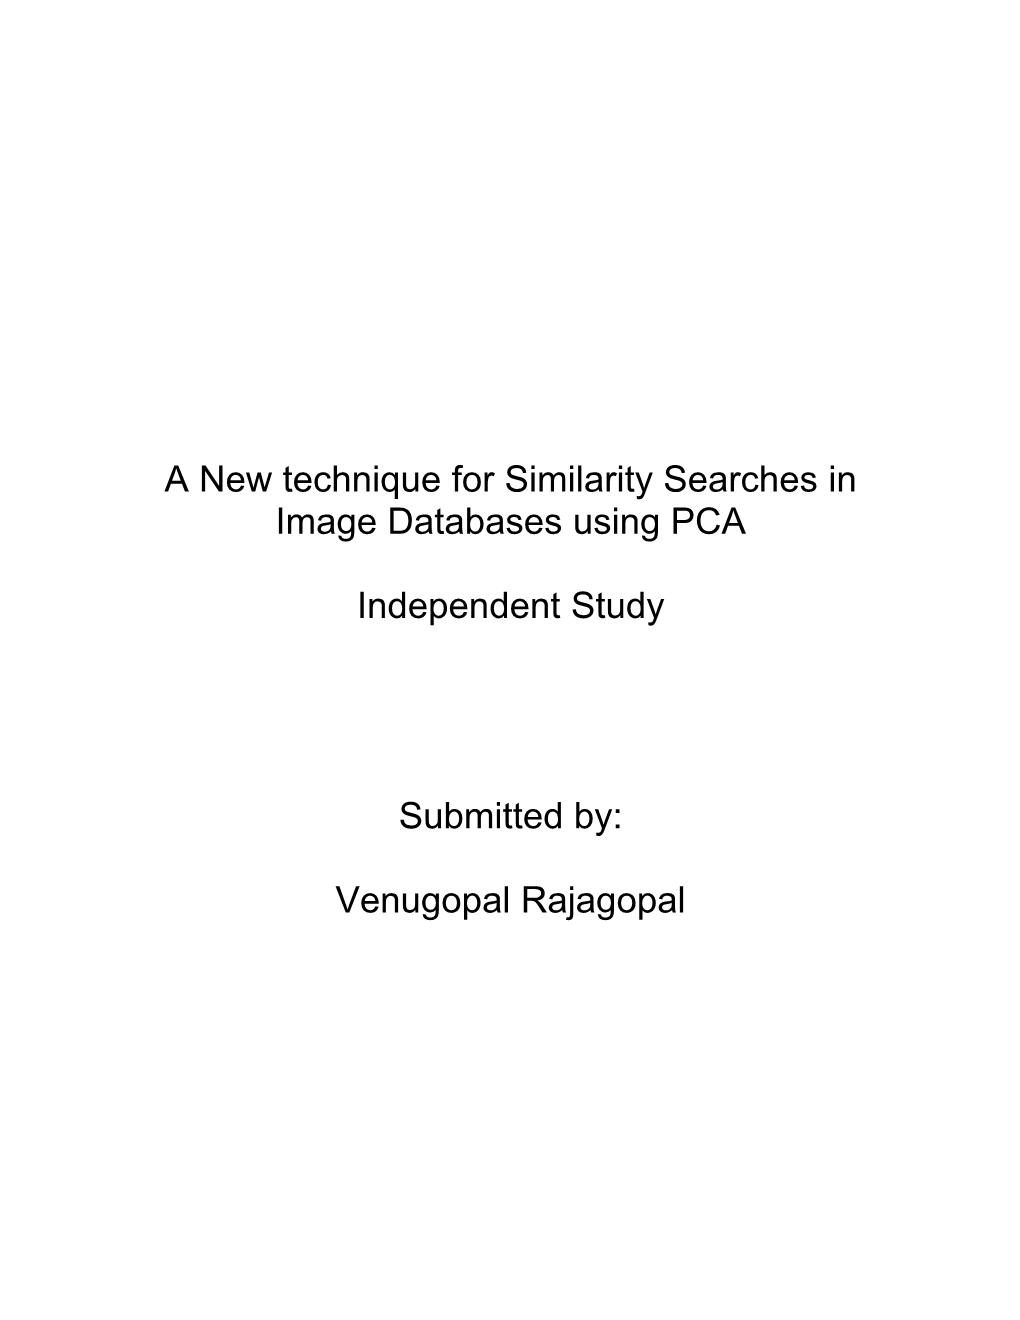 Similarity Searches in Image Databases